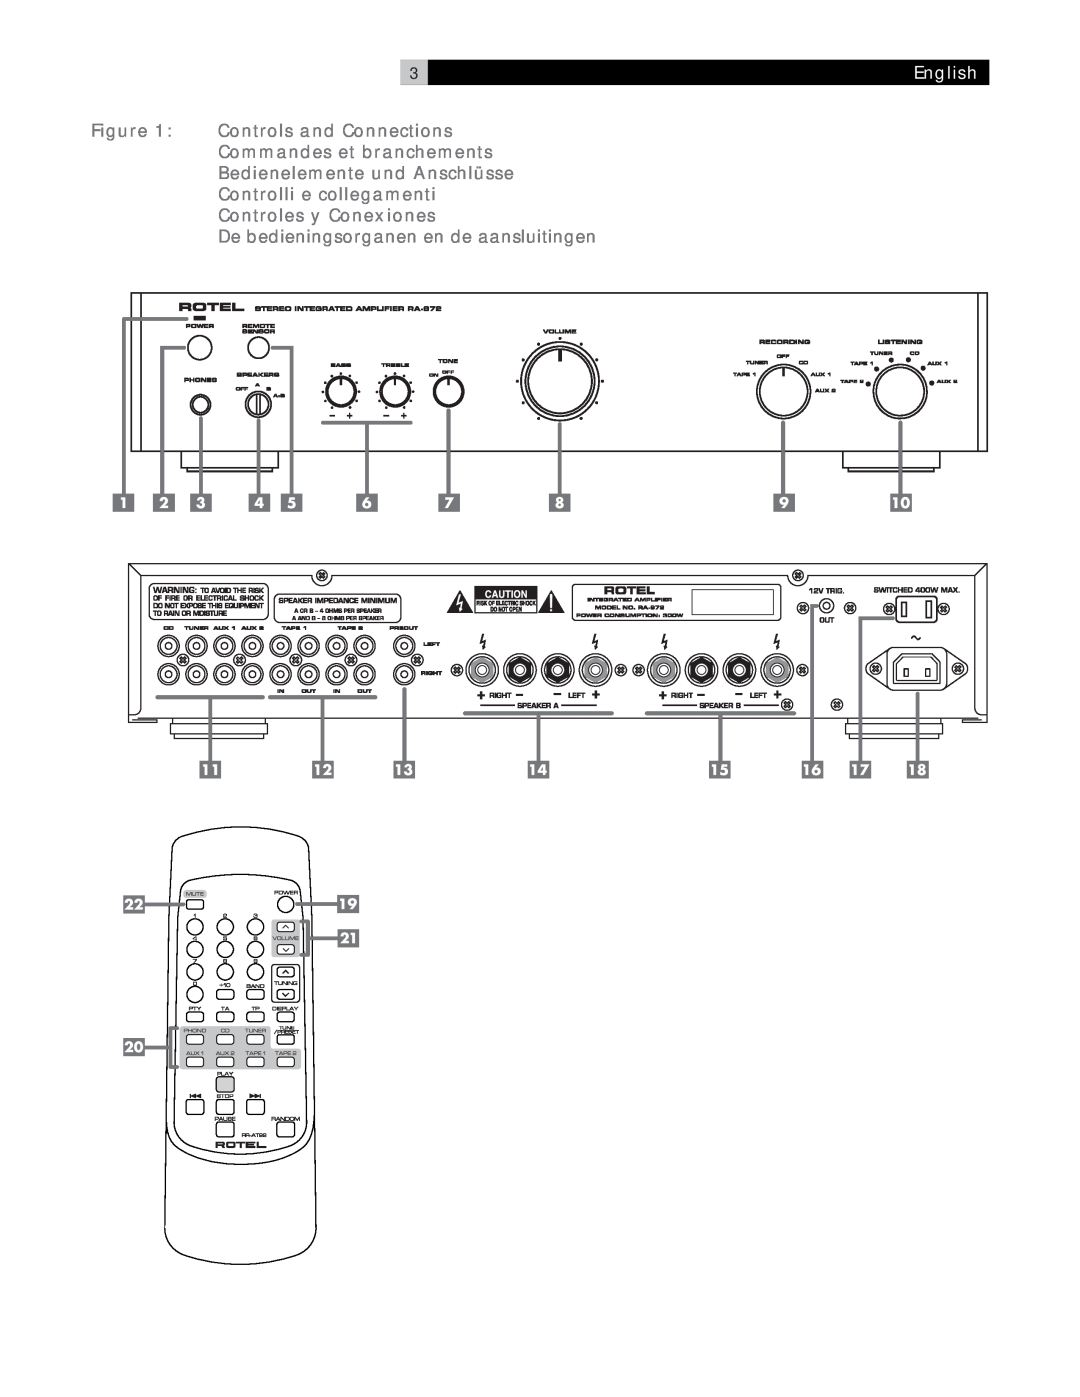 Rotel RA-972 owner manual English, Controls and Connections, Commandes et branchements, Bedienelemente und Anschlüsse 